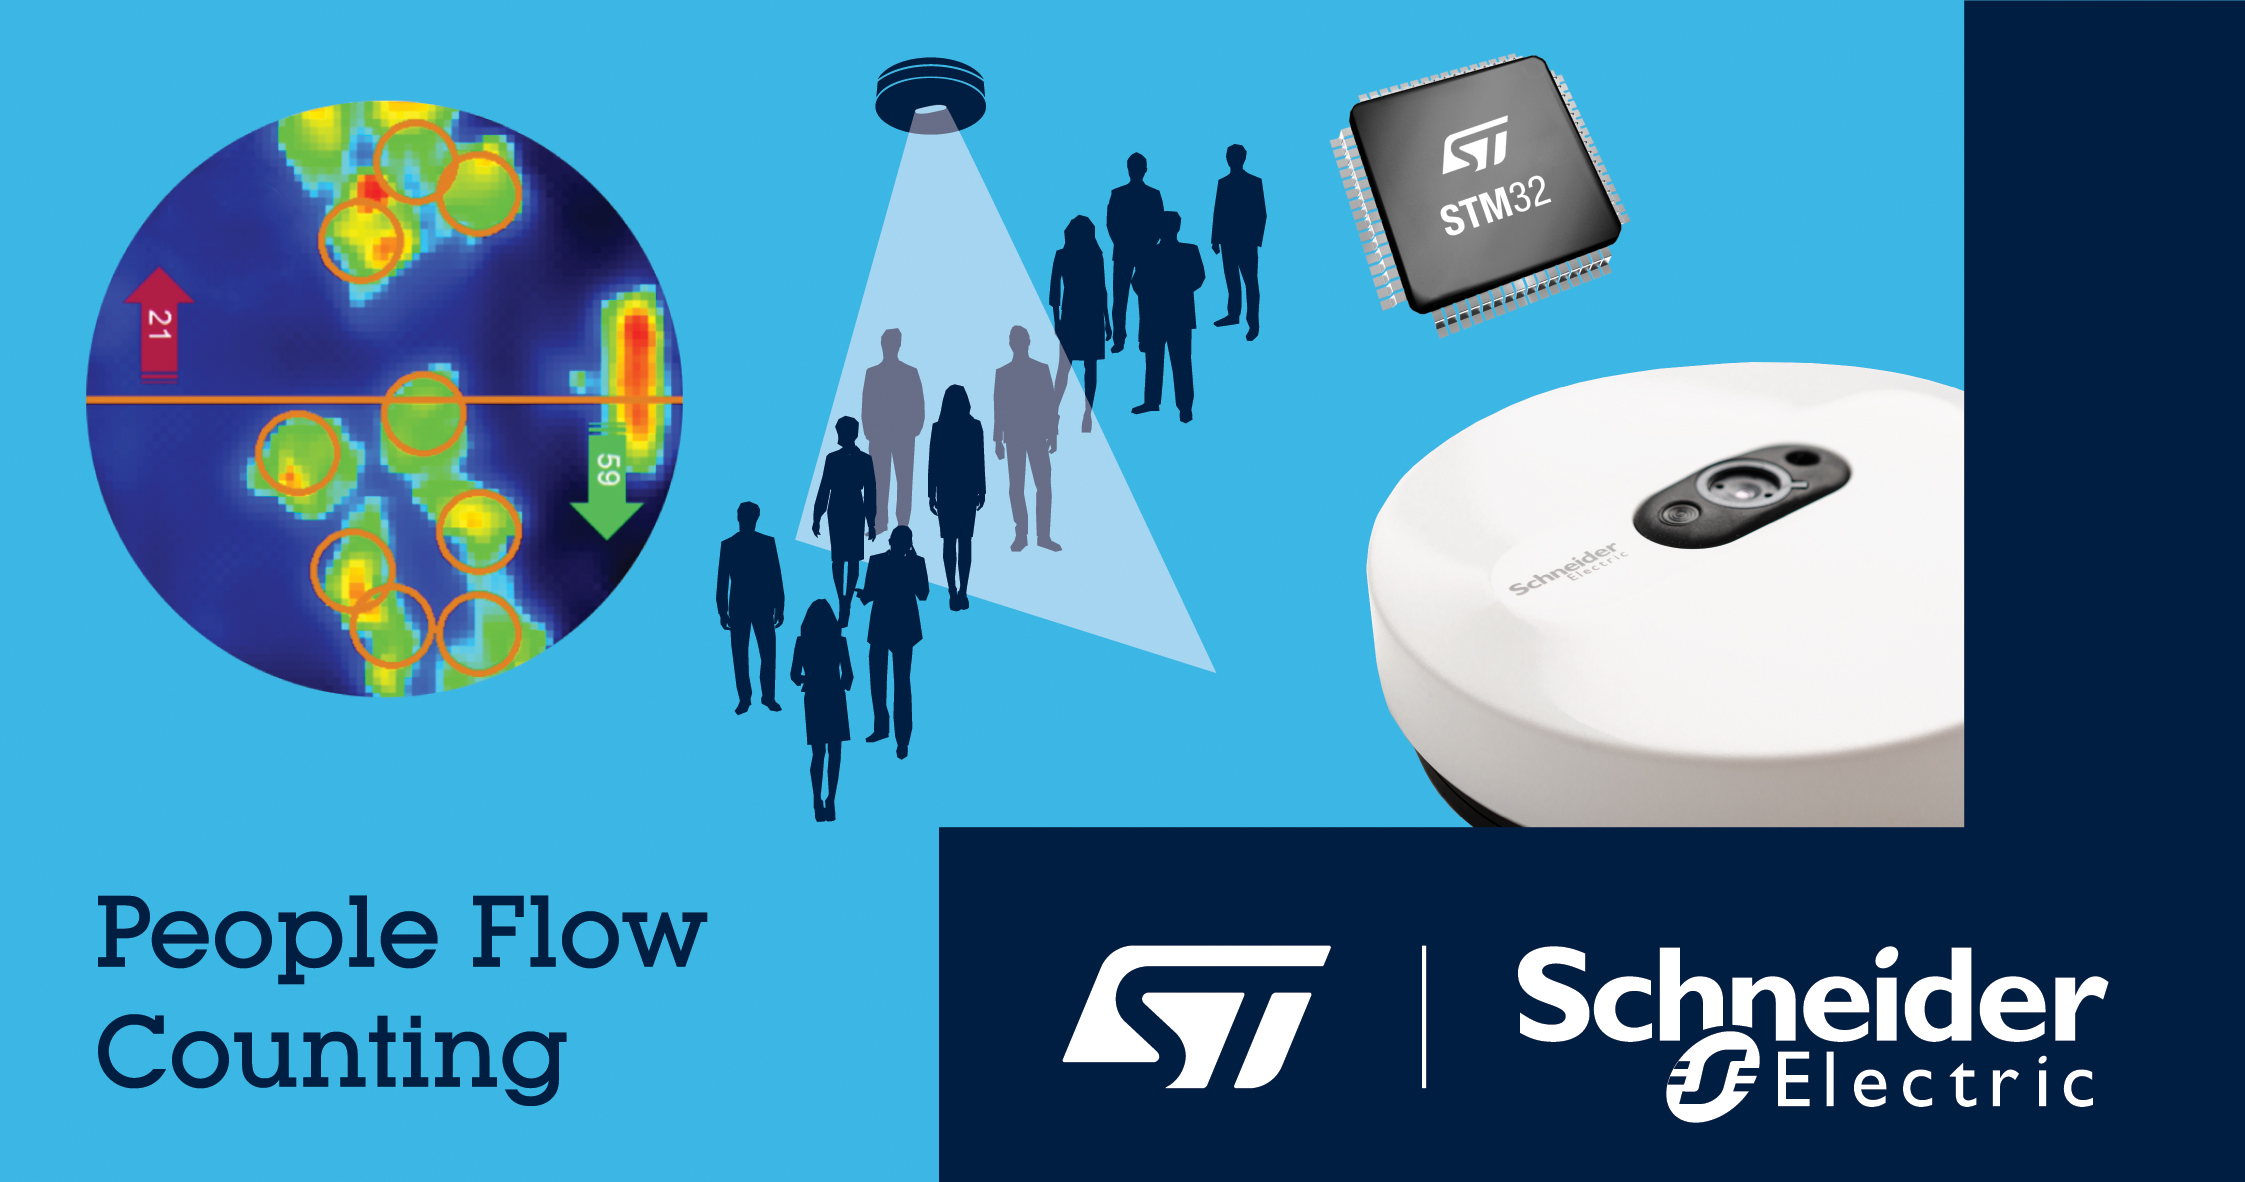 STMicroelectronics and Schneider Electric Reveal Advanced People-Counting Solution using Artificial Intelligence on STM32 Microcontroller